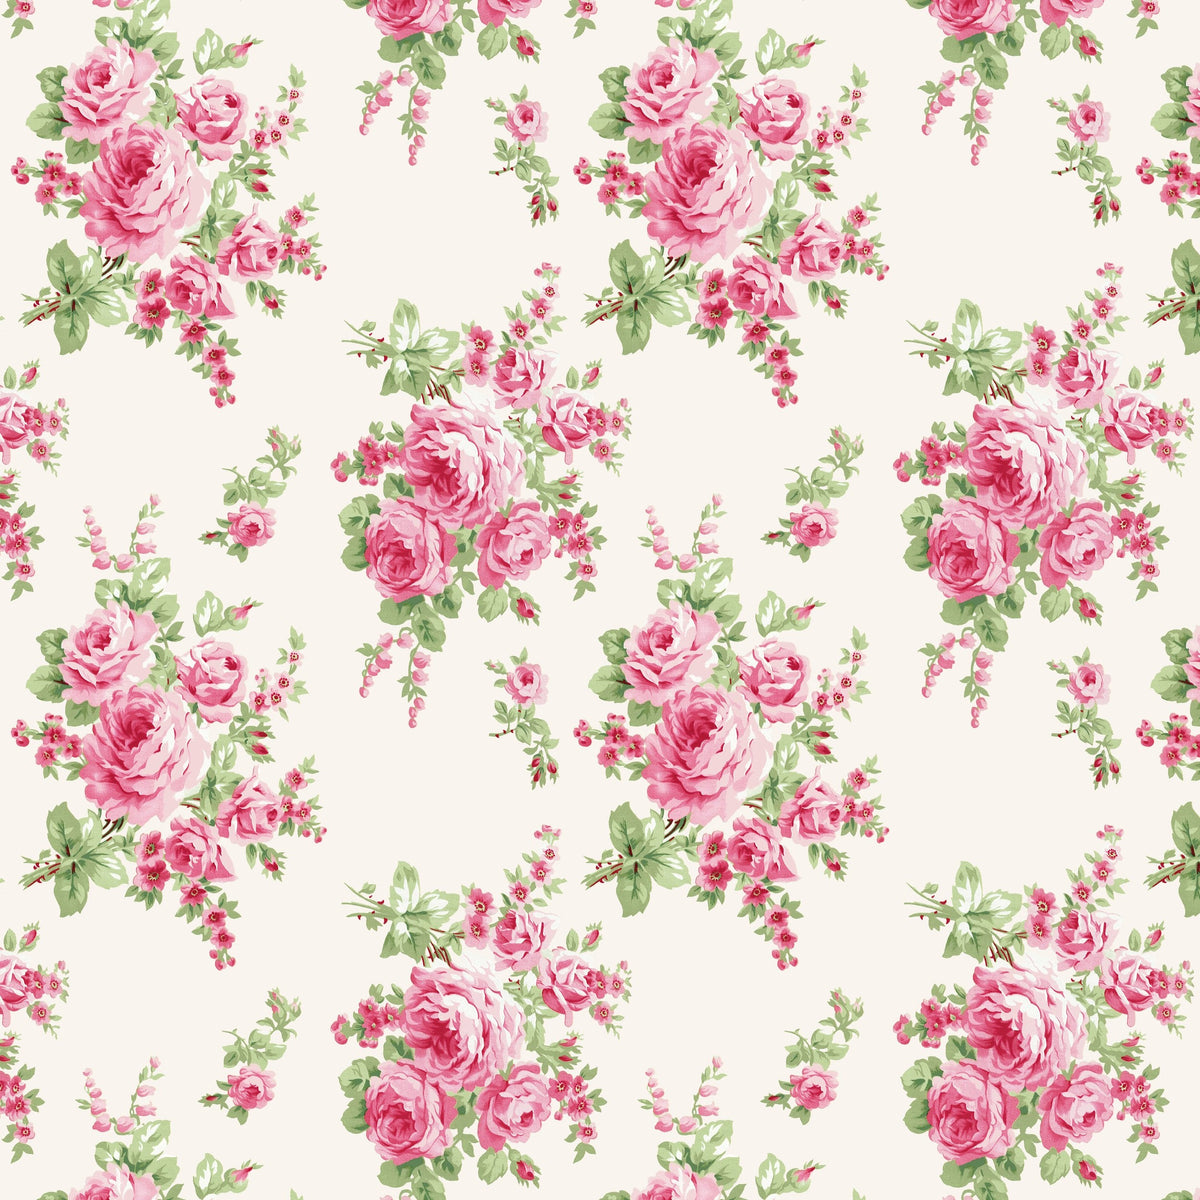 Barefoot Roses Classics: Large Floral